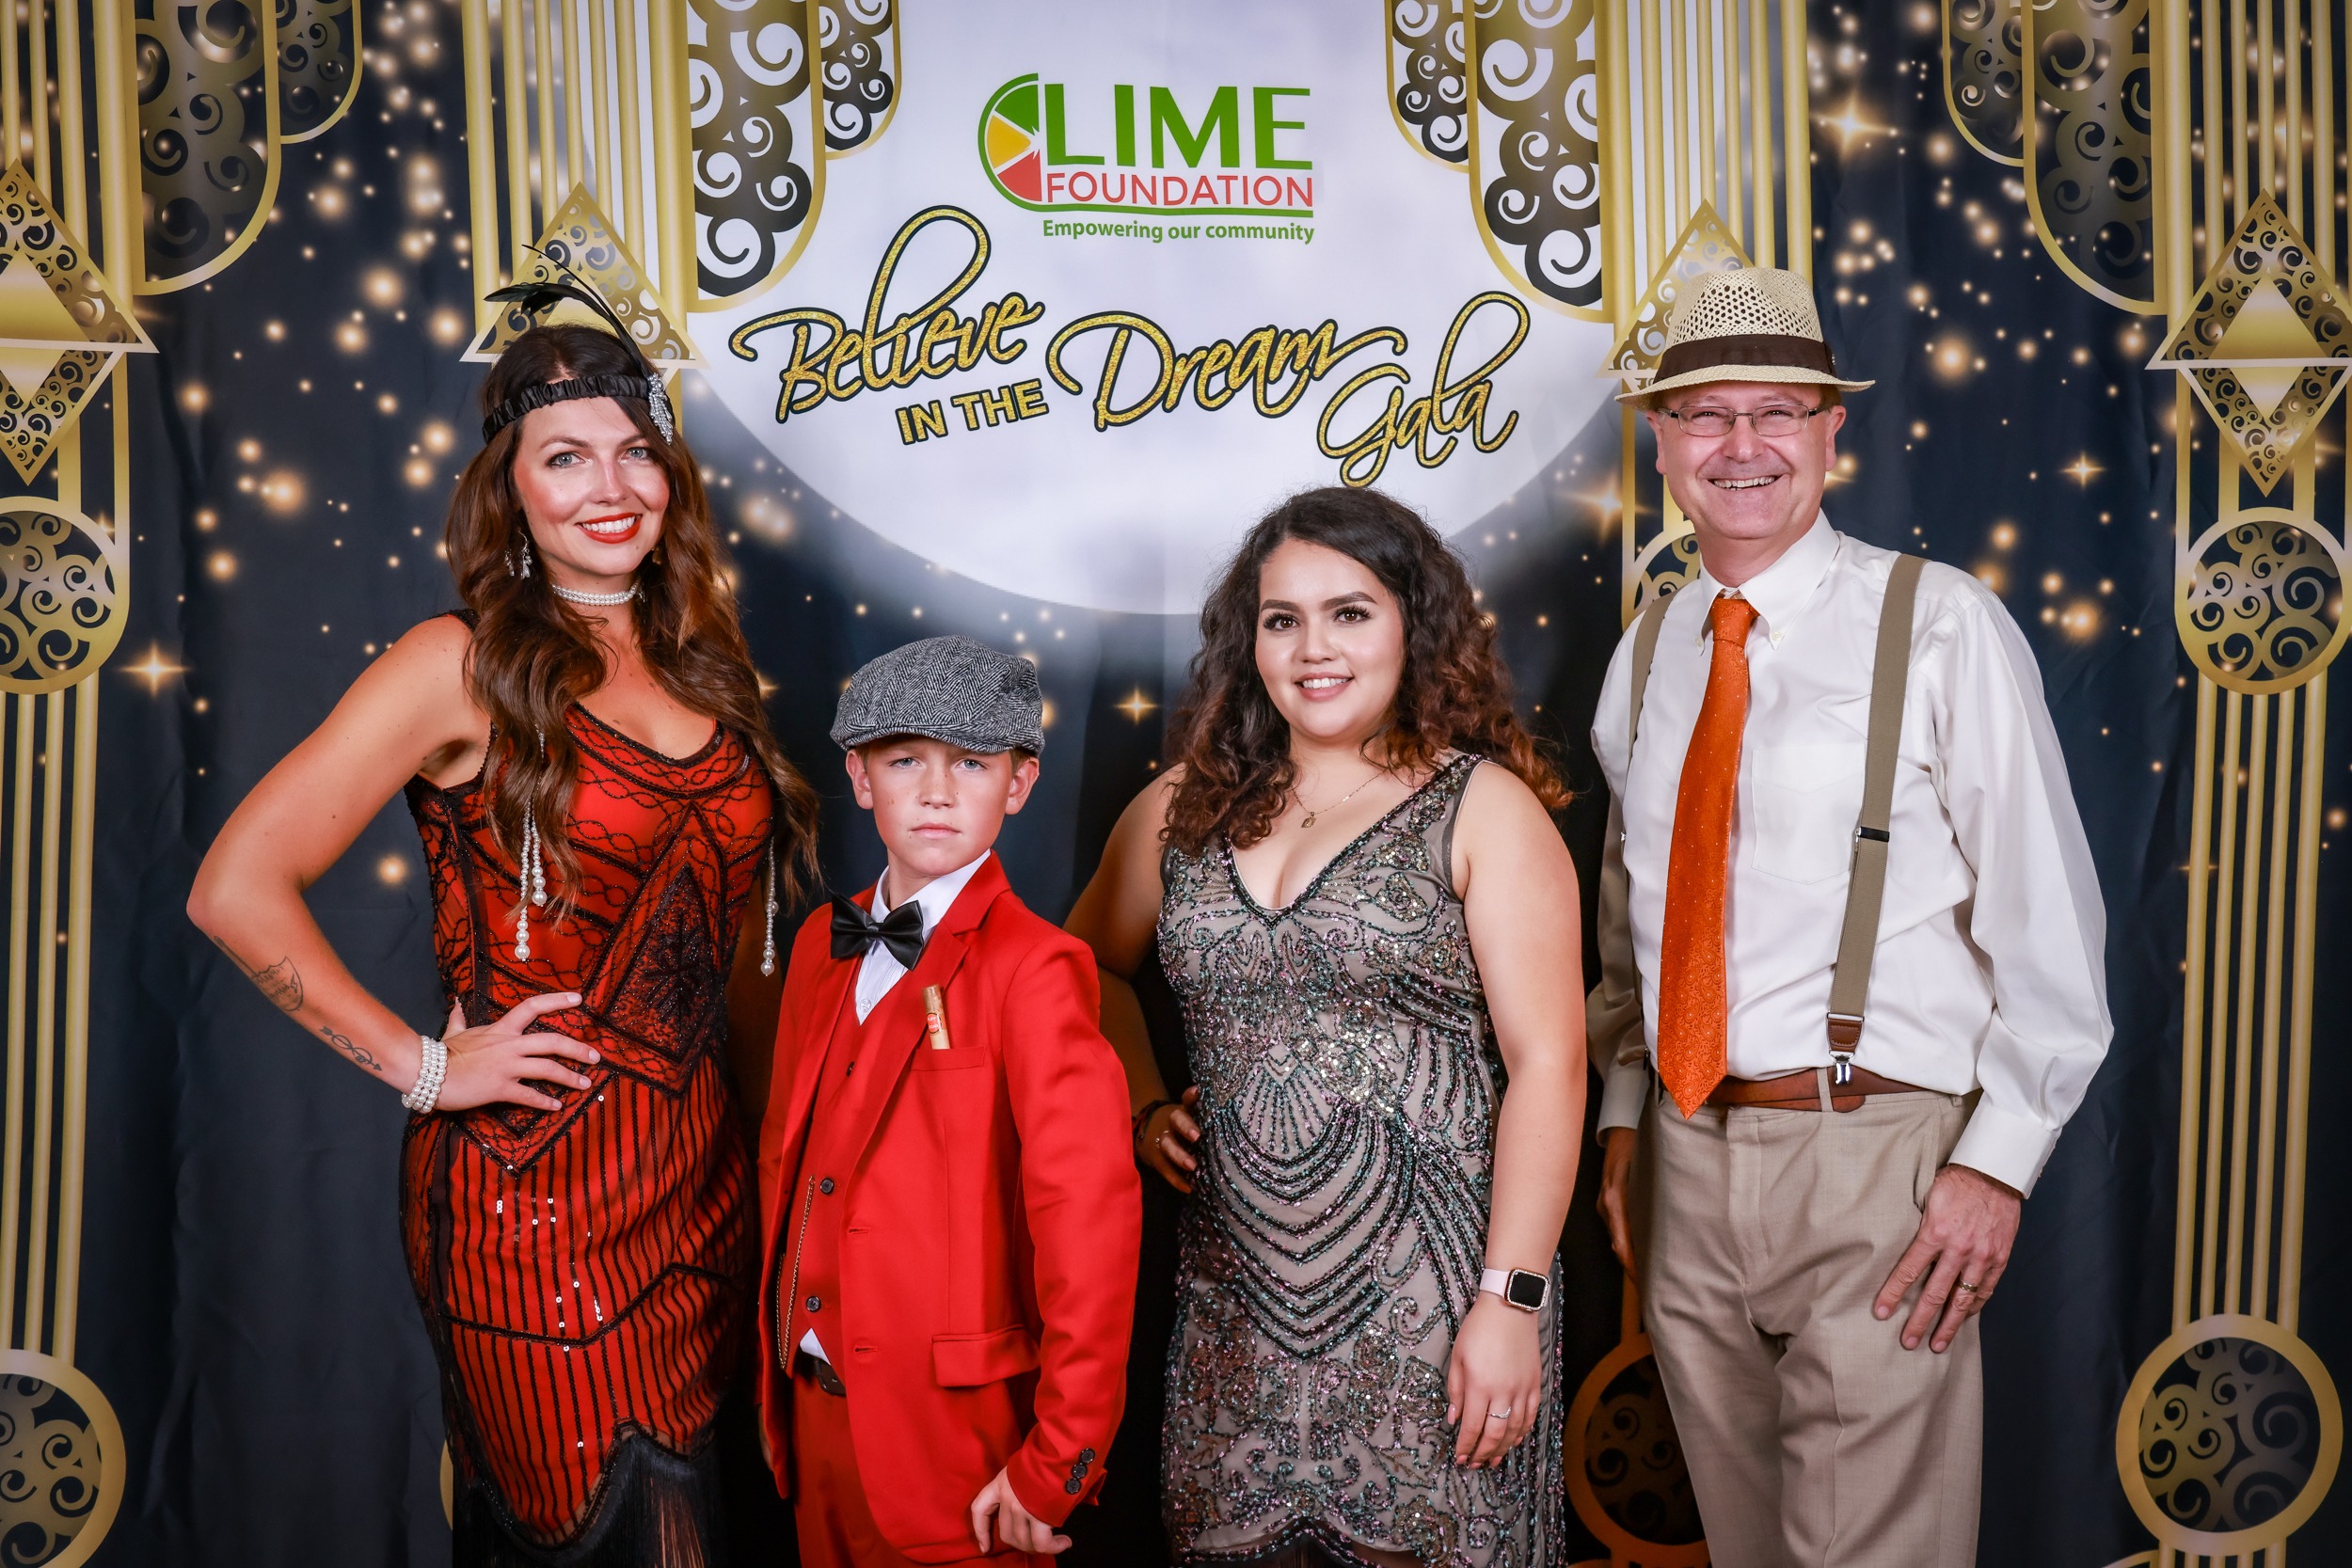 A group of people posing for a photo at a Santa Rosa Non-Profit party hosted by The LIME Foundation.